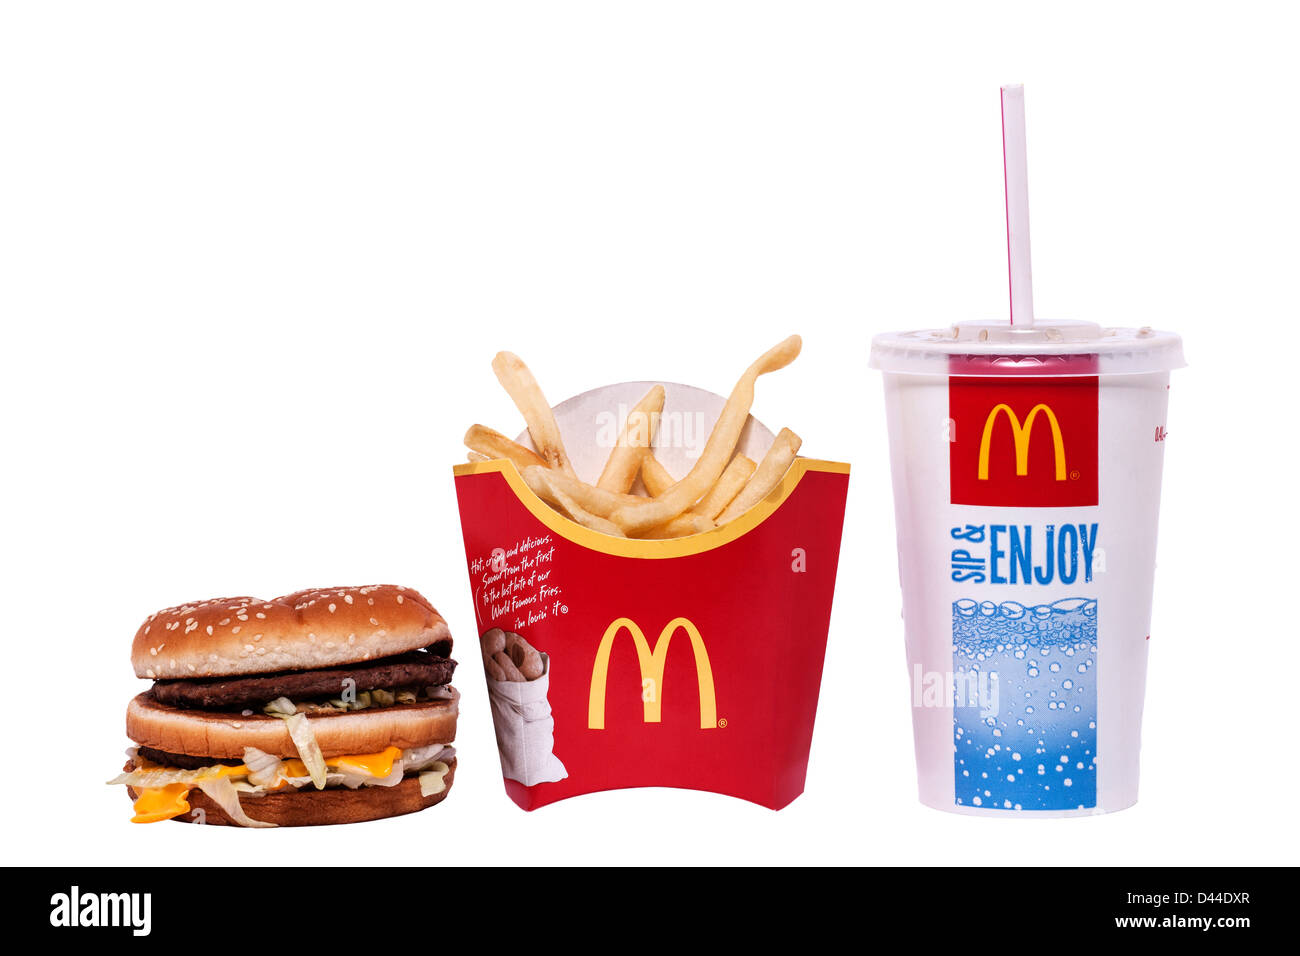 A Mcdonalds Big Mac meal with burger , fries and drink on a white background Stock Photo